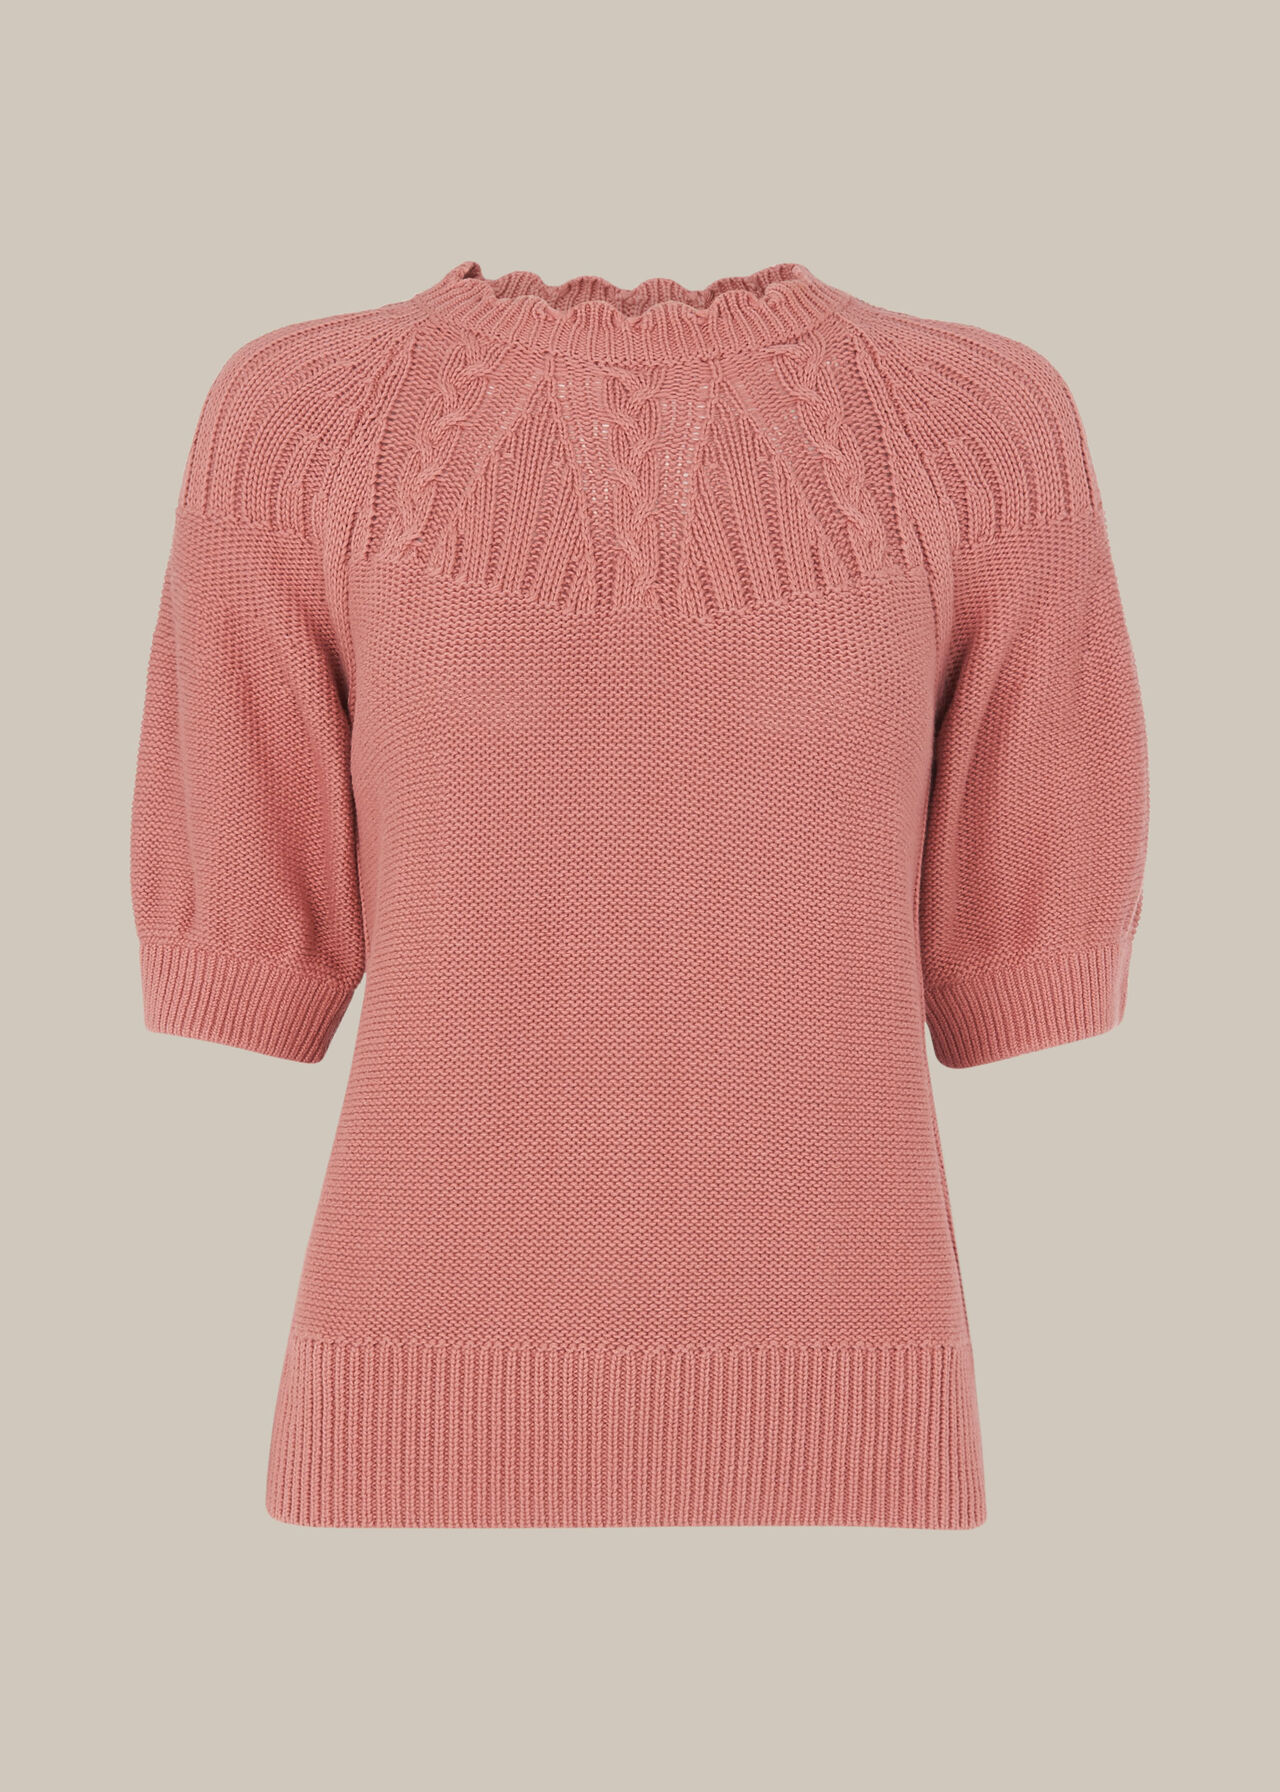 Bell Sleeve Cable Knit Pale Pink